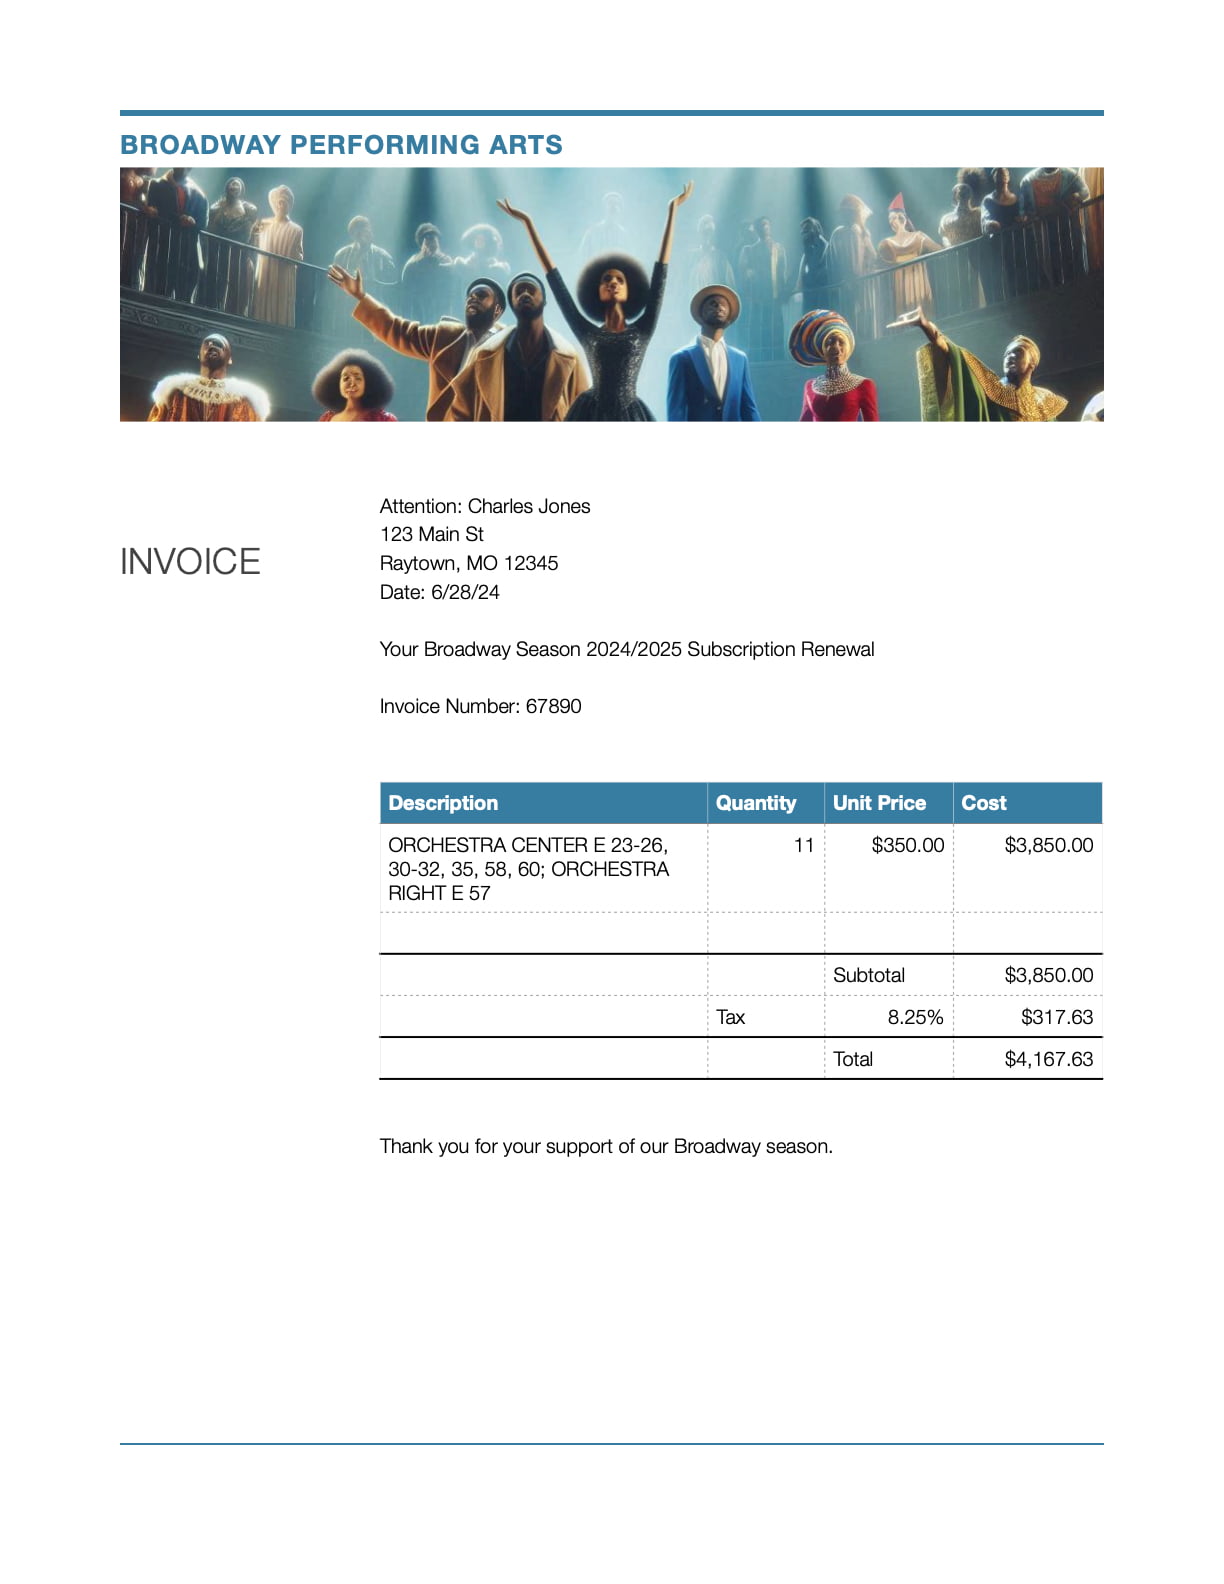 Depicts an invoice for a Broadway season subscription renewal.